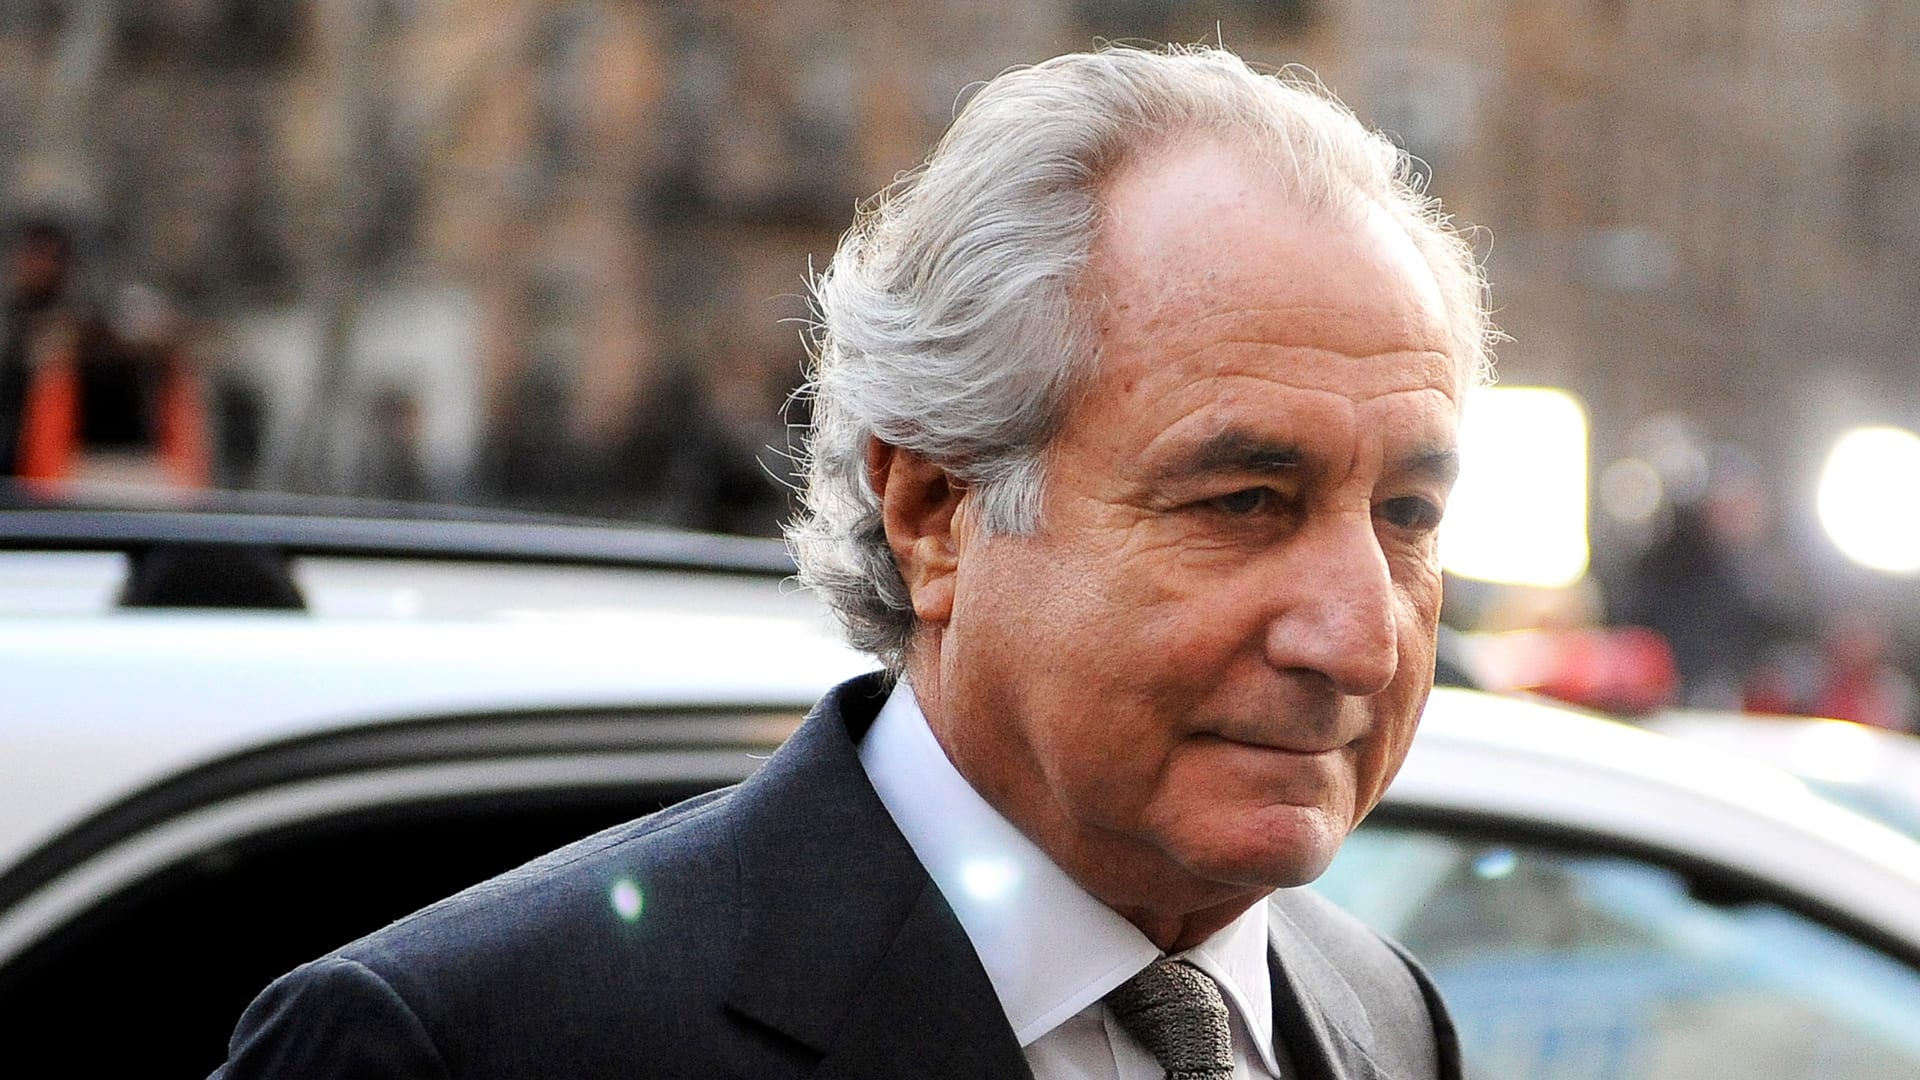 You CAN’T take it with you, so what happened to Bernie Madoff’s money?